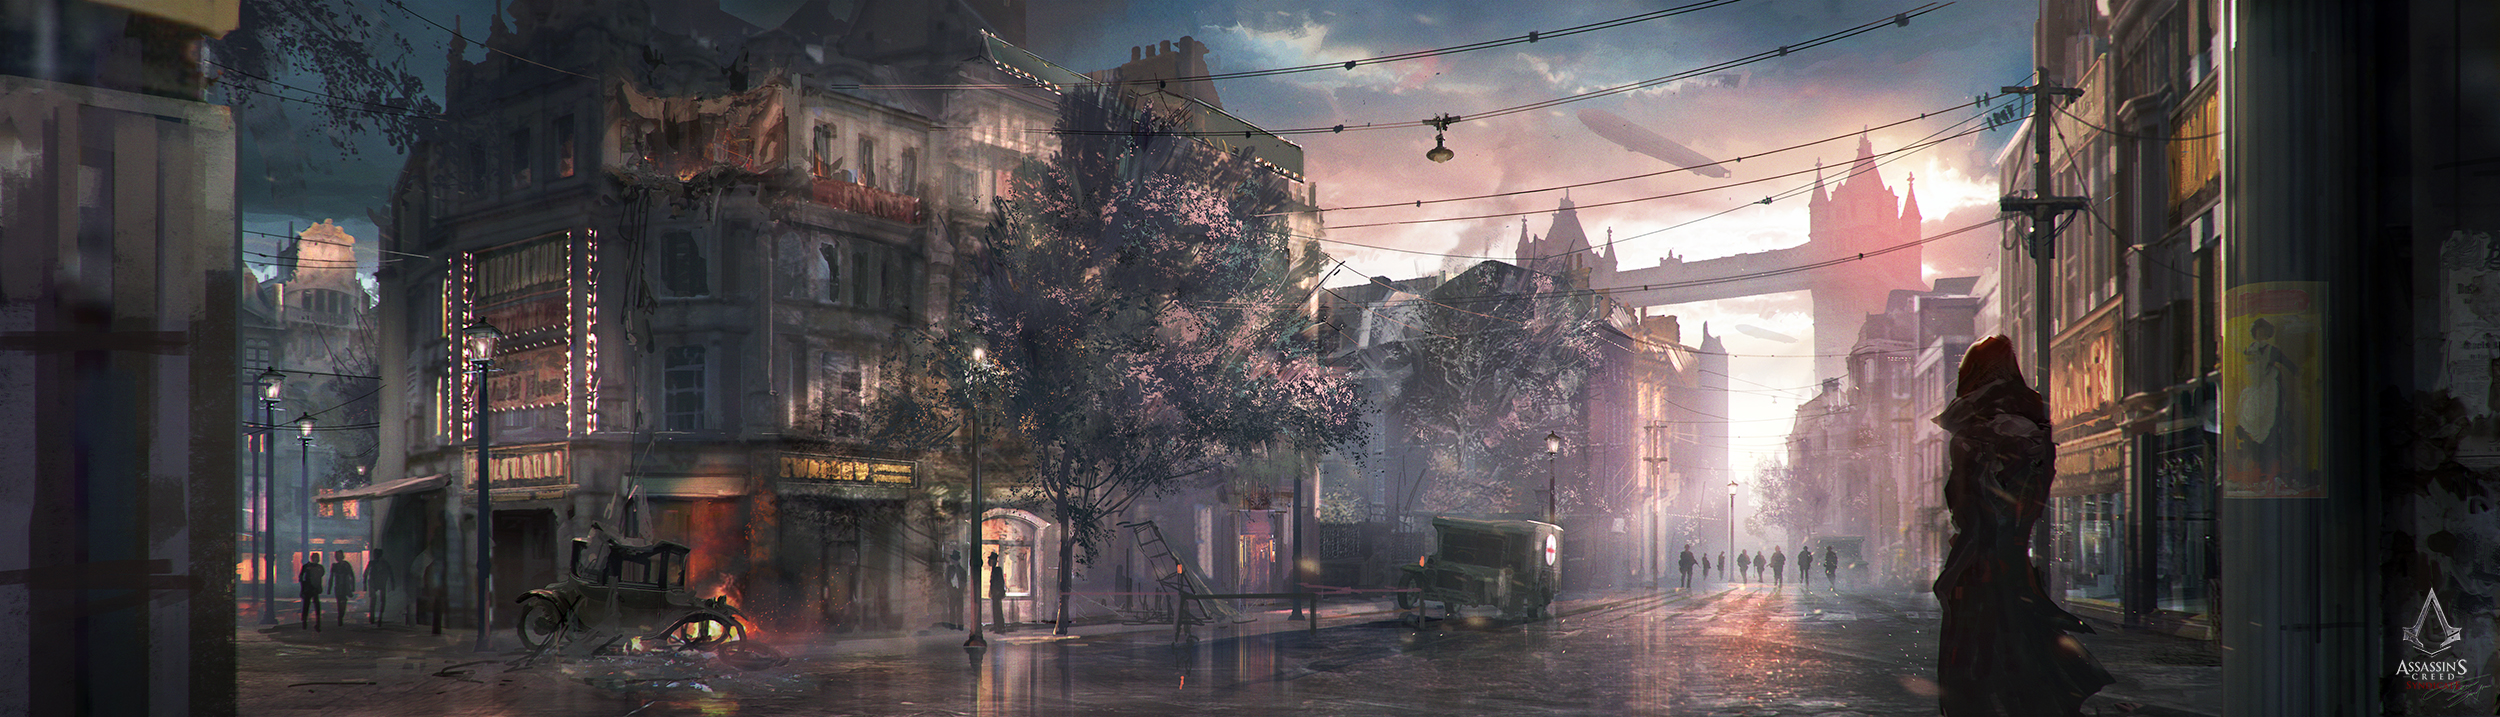 Assassin’s Creed Syndicate concept art